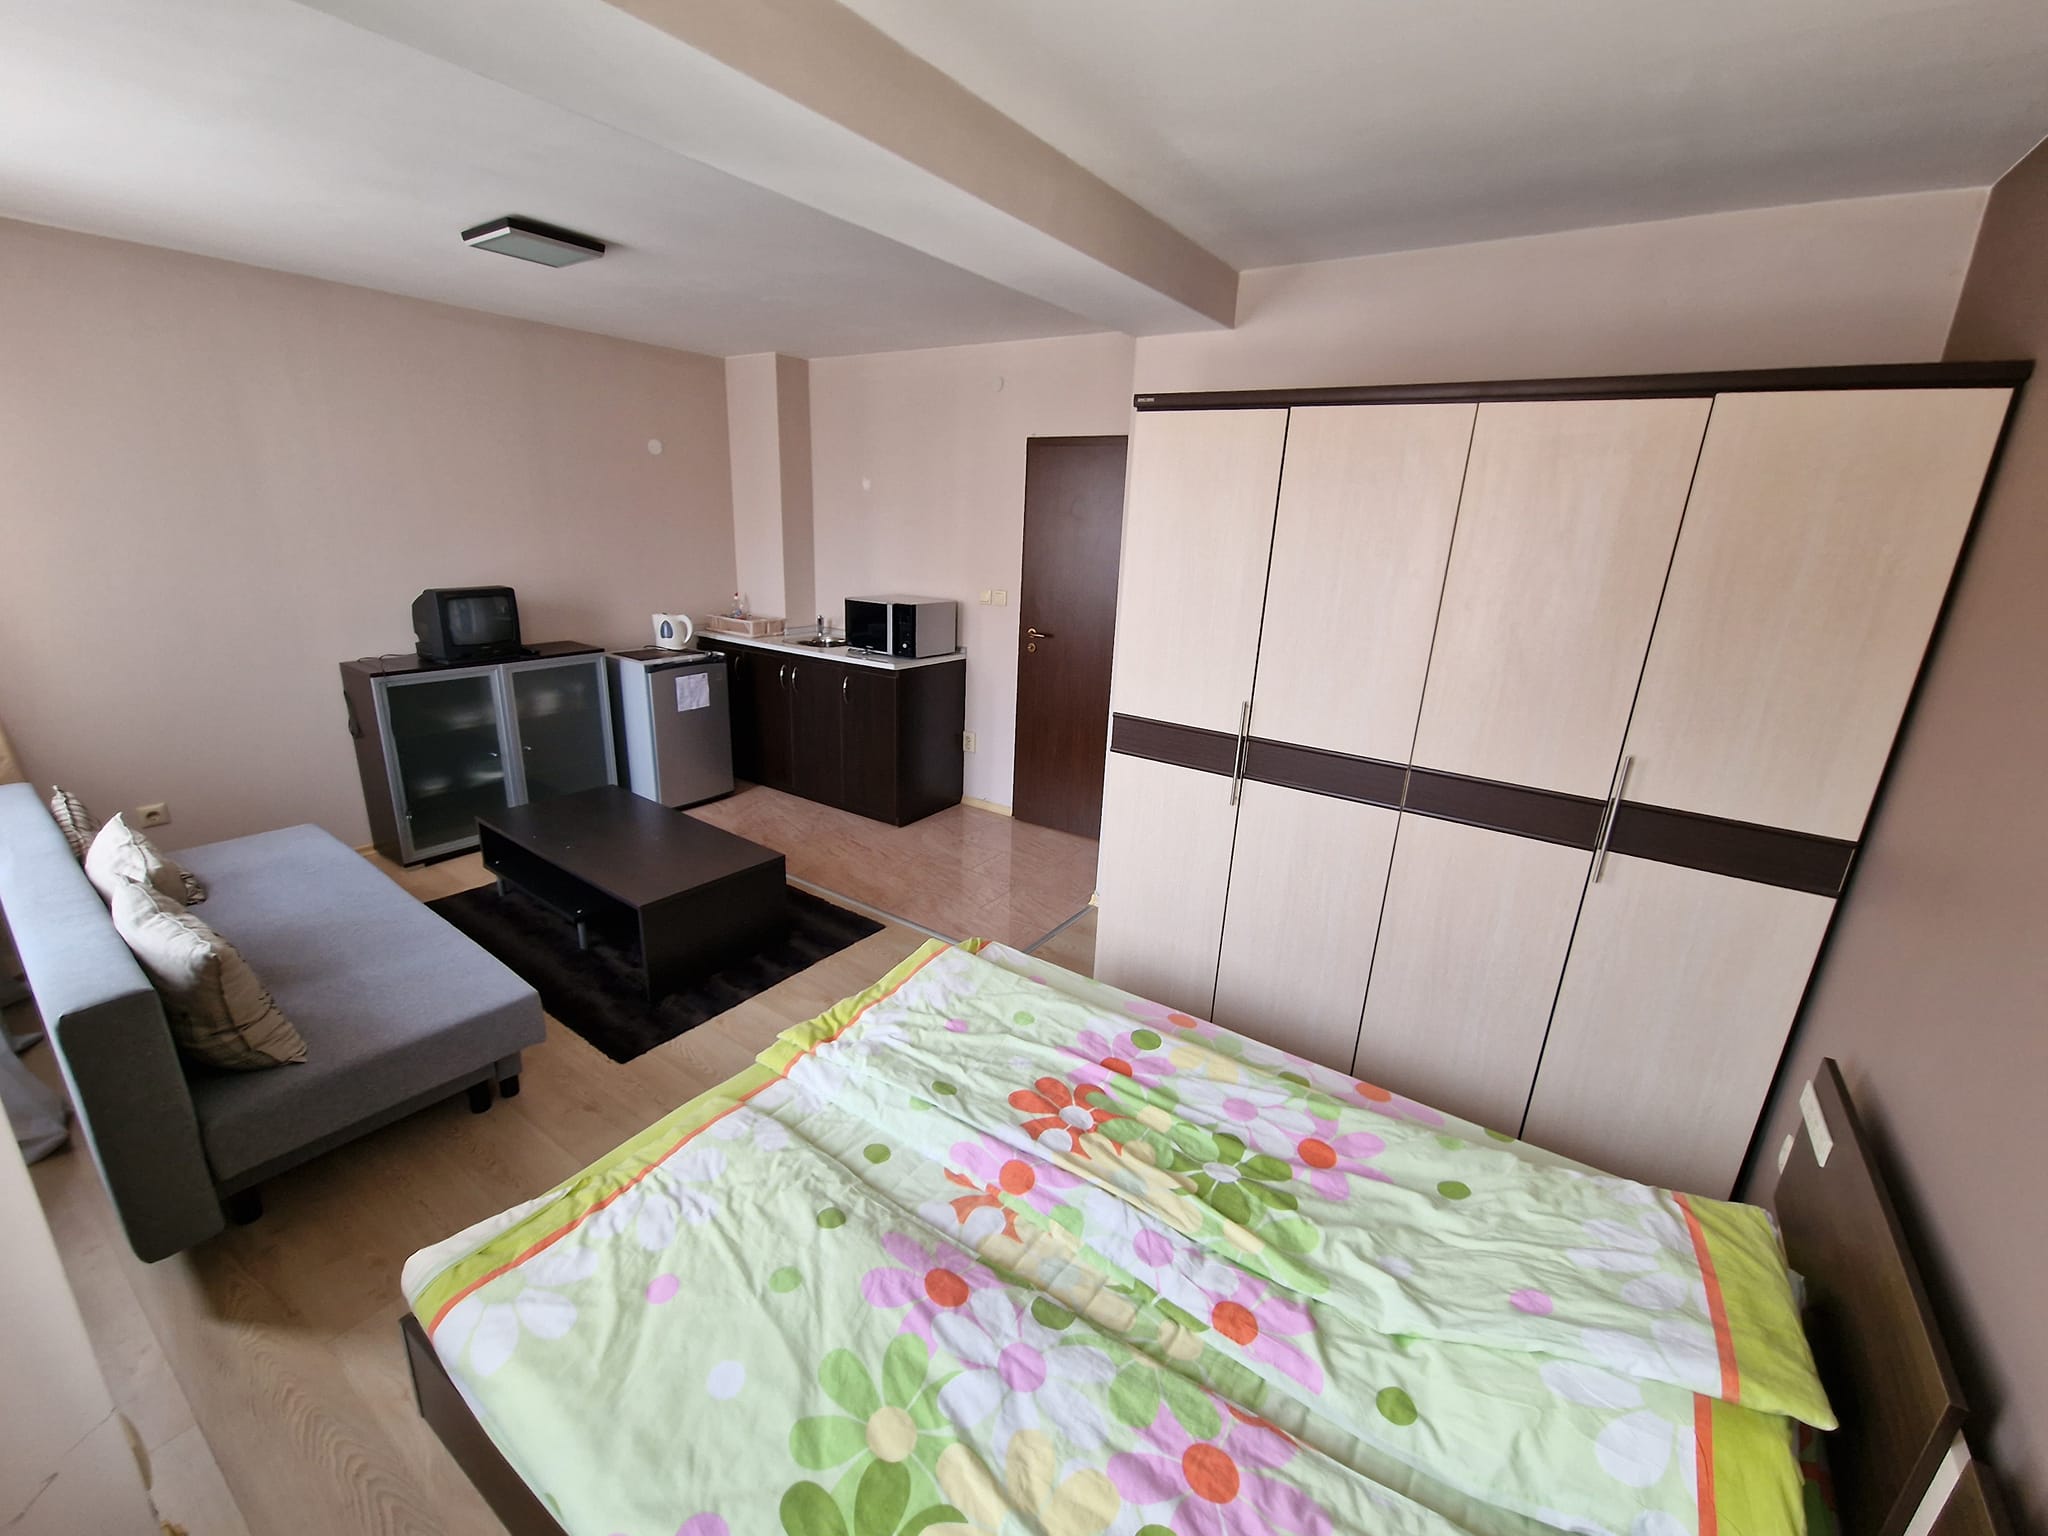 Bansko: Furnished studio in a residential building with a low maintenance fee